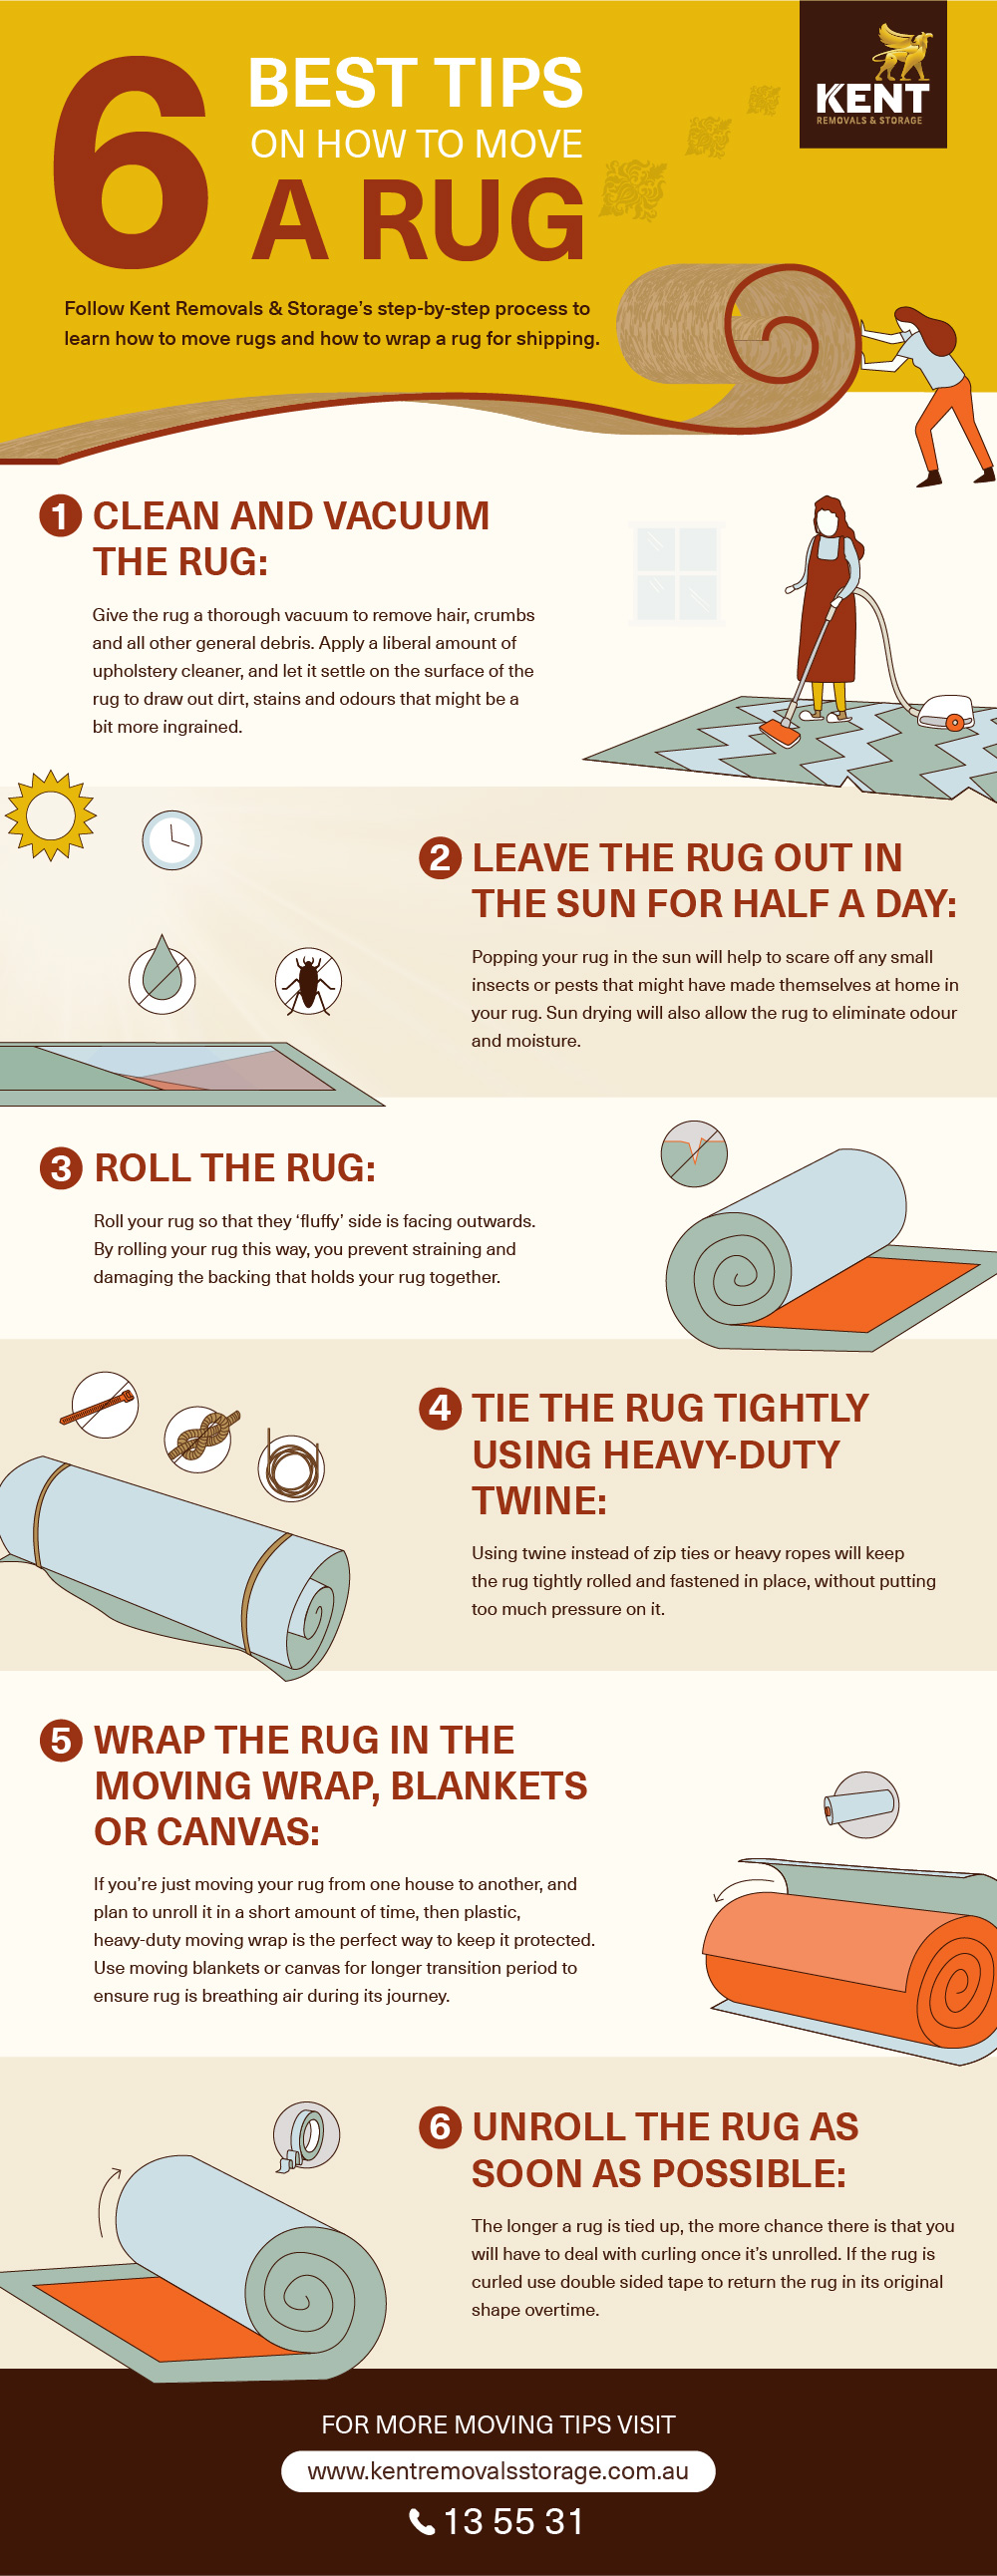 6 BEST TIPS ON HOW TO MOVE A RUG